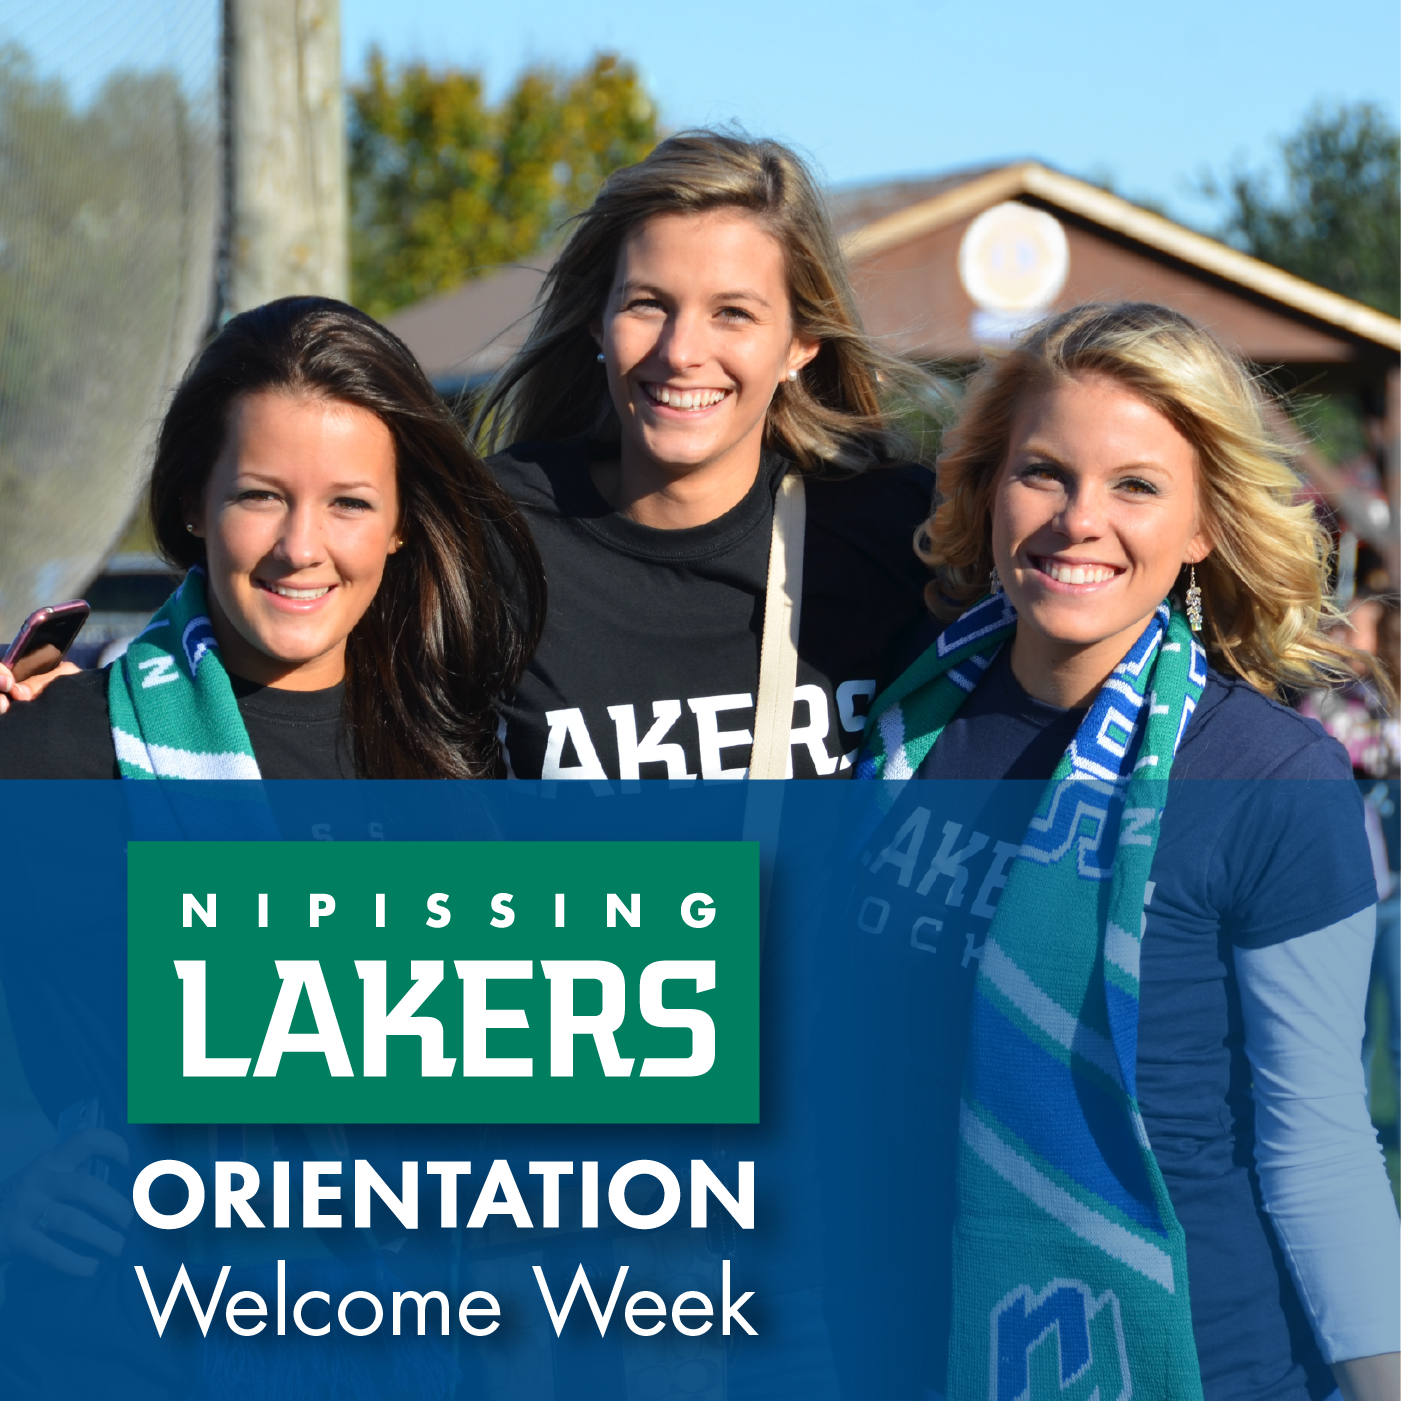 Lakers students picture; blue and green banner for Lakers Orientation Welcome Week